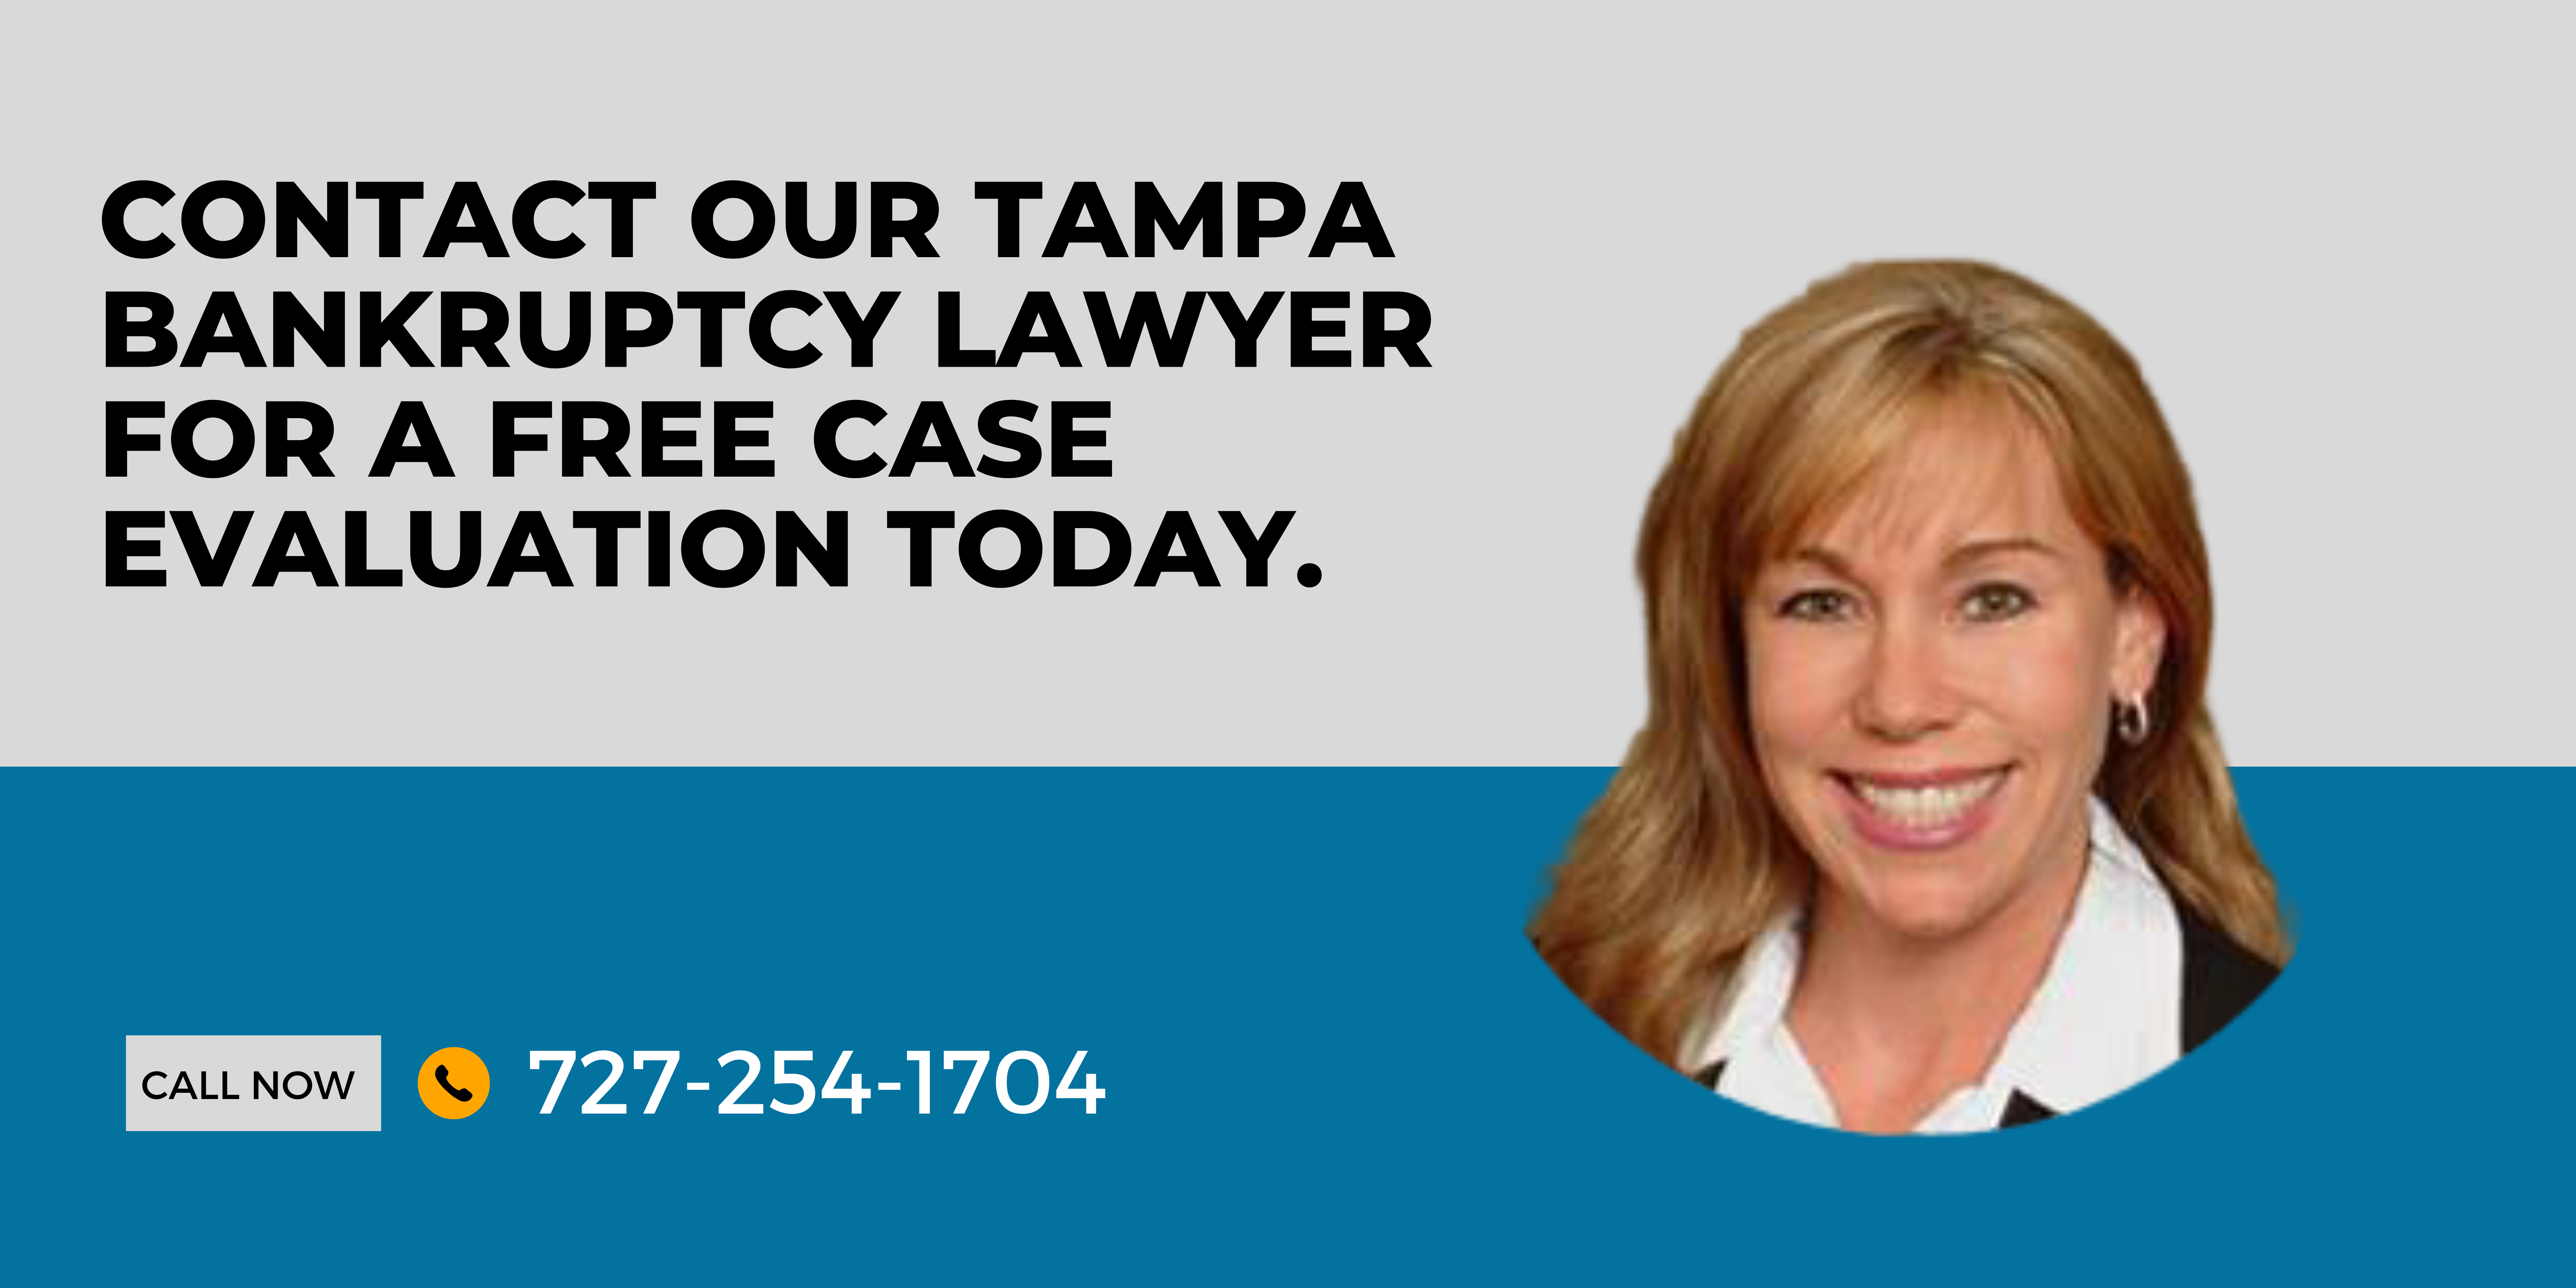 Contact our Tampa Bankruptcy Lawyer